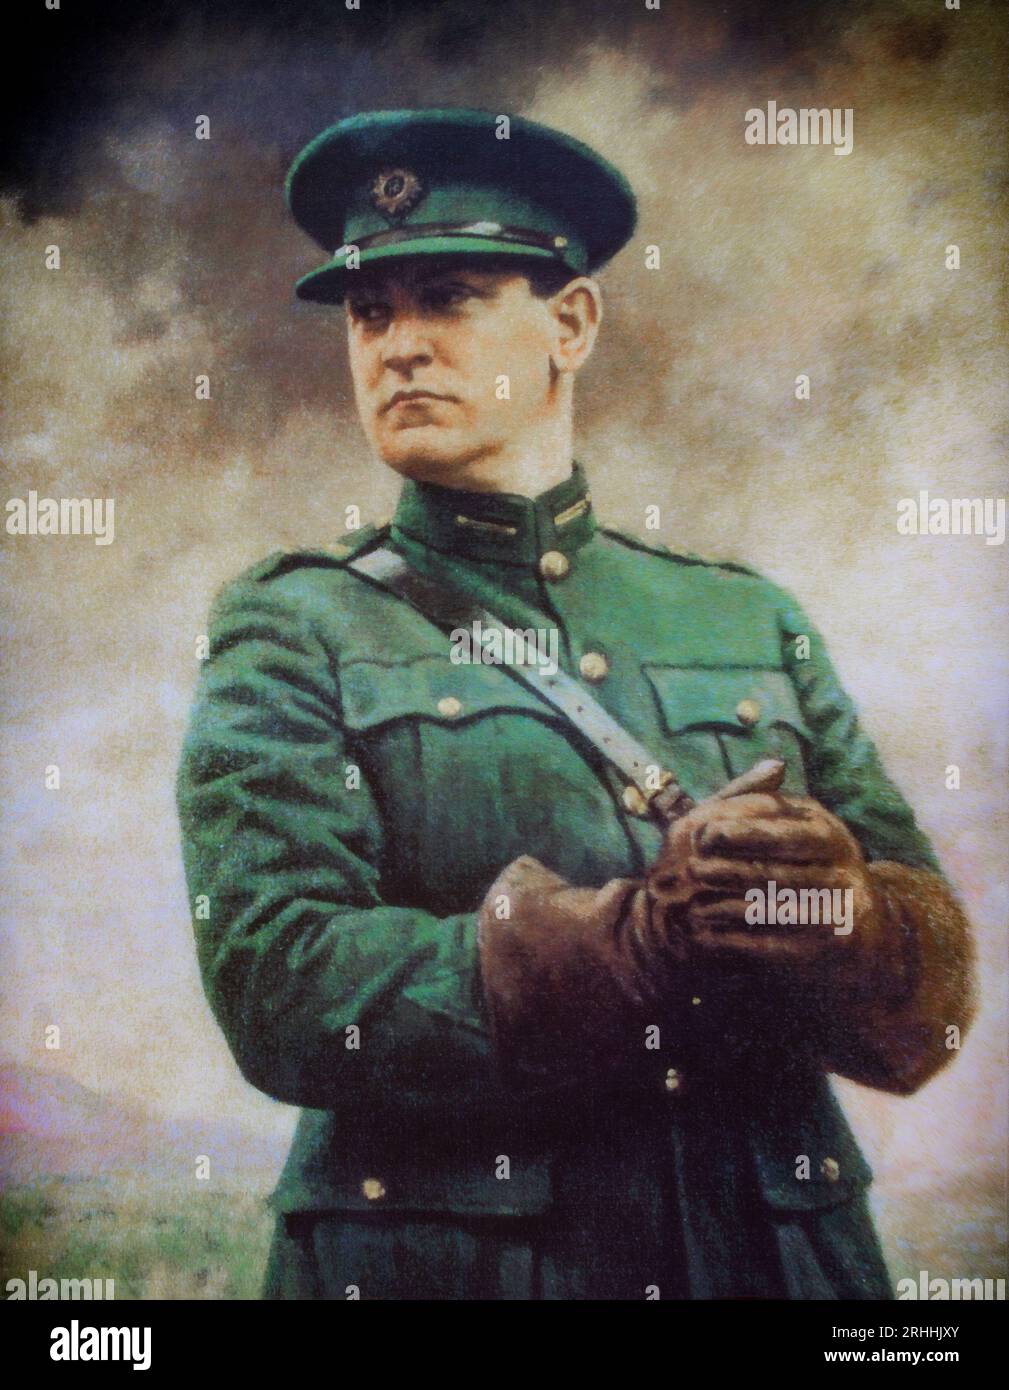 An 20th century portrait of  Michael Collins (1890-1922), Irish revolutionary, soldier and politician now hanging in the Dail. He was a leading figure in the early-20th century struggle for Irish independence who travelled to the London peace conference to negotiate a treaty. The negotiations ultimately resulted in the Anglo-Irish Treaty which was signed on 6 December 1921. He was Chairman of the Provisional Government of the Irish Free State from January 1922 and commander-in-chief of the National Army from July until his death in an ambush in August 1922, during the Civil War. Stock Photo